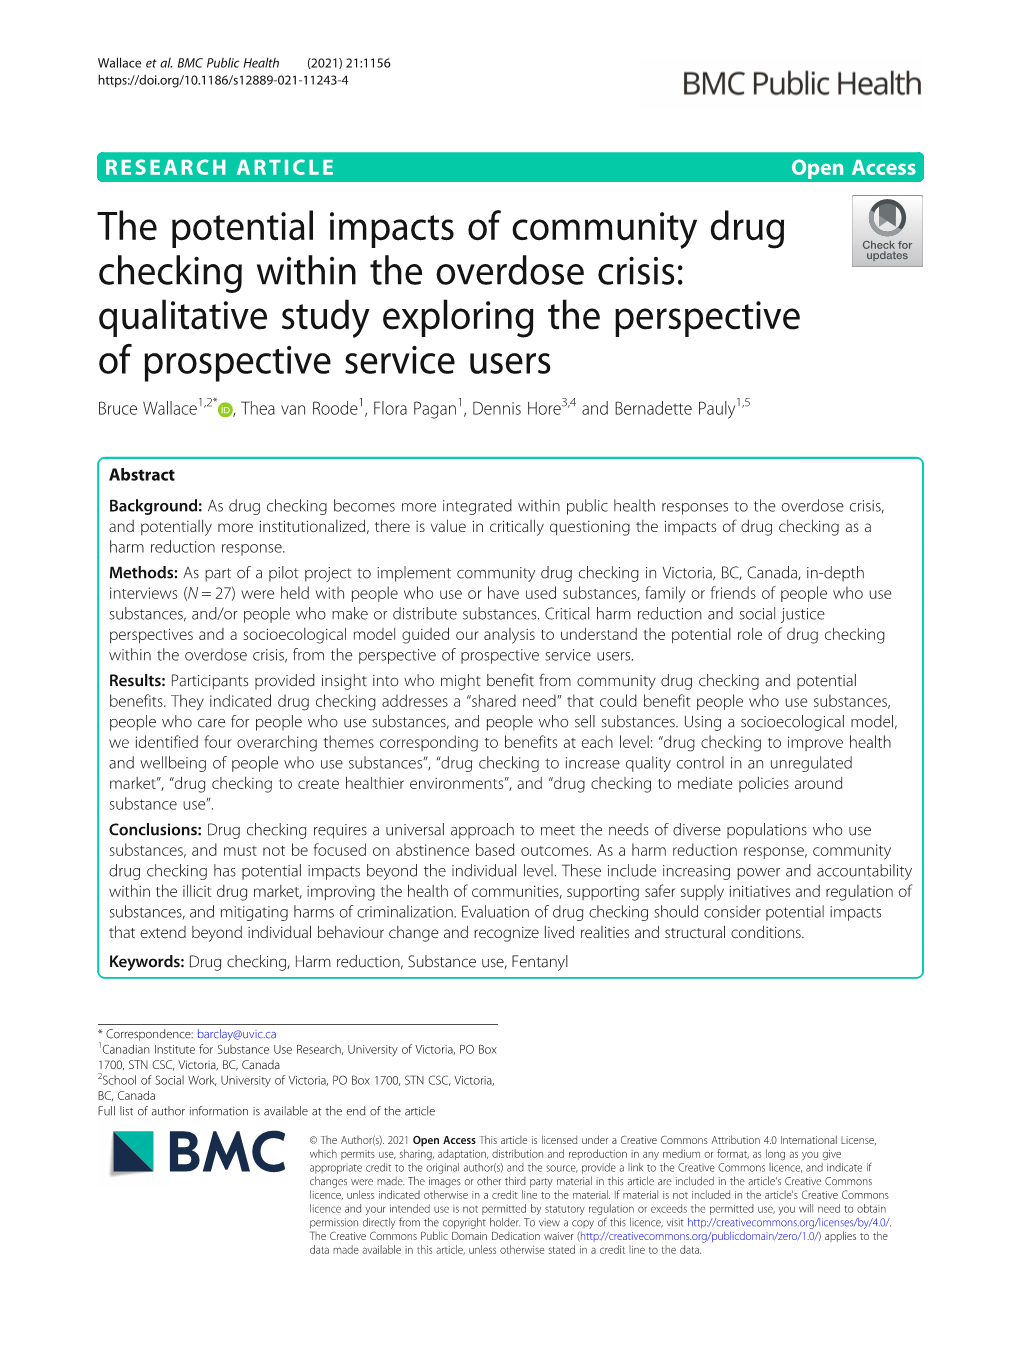 The Potential Impacts of Community Drug Checking Within the Overdose